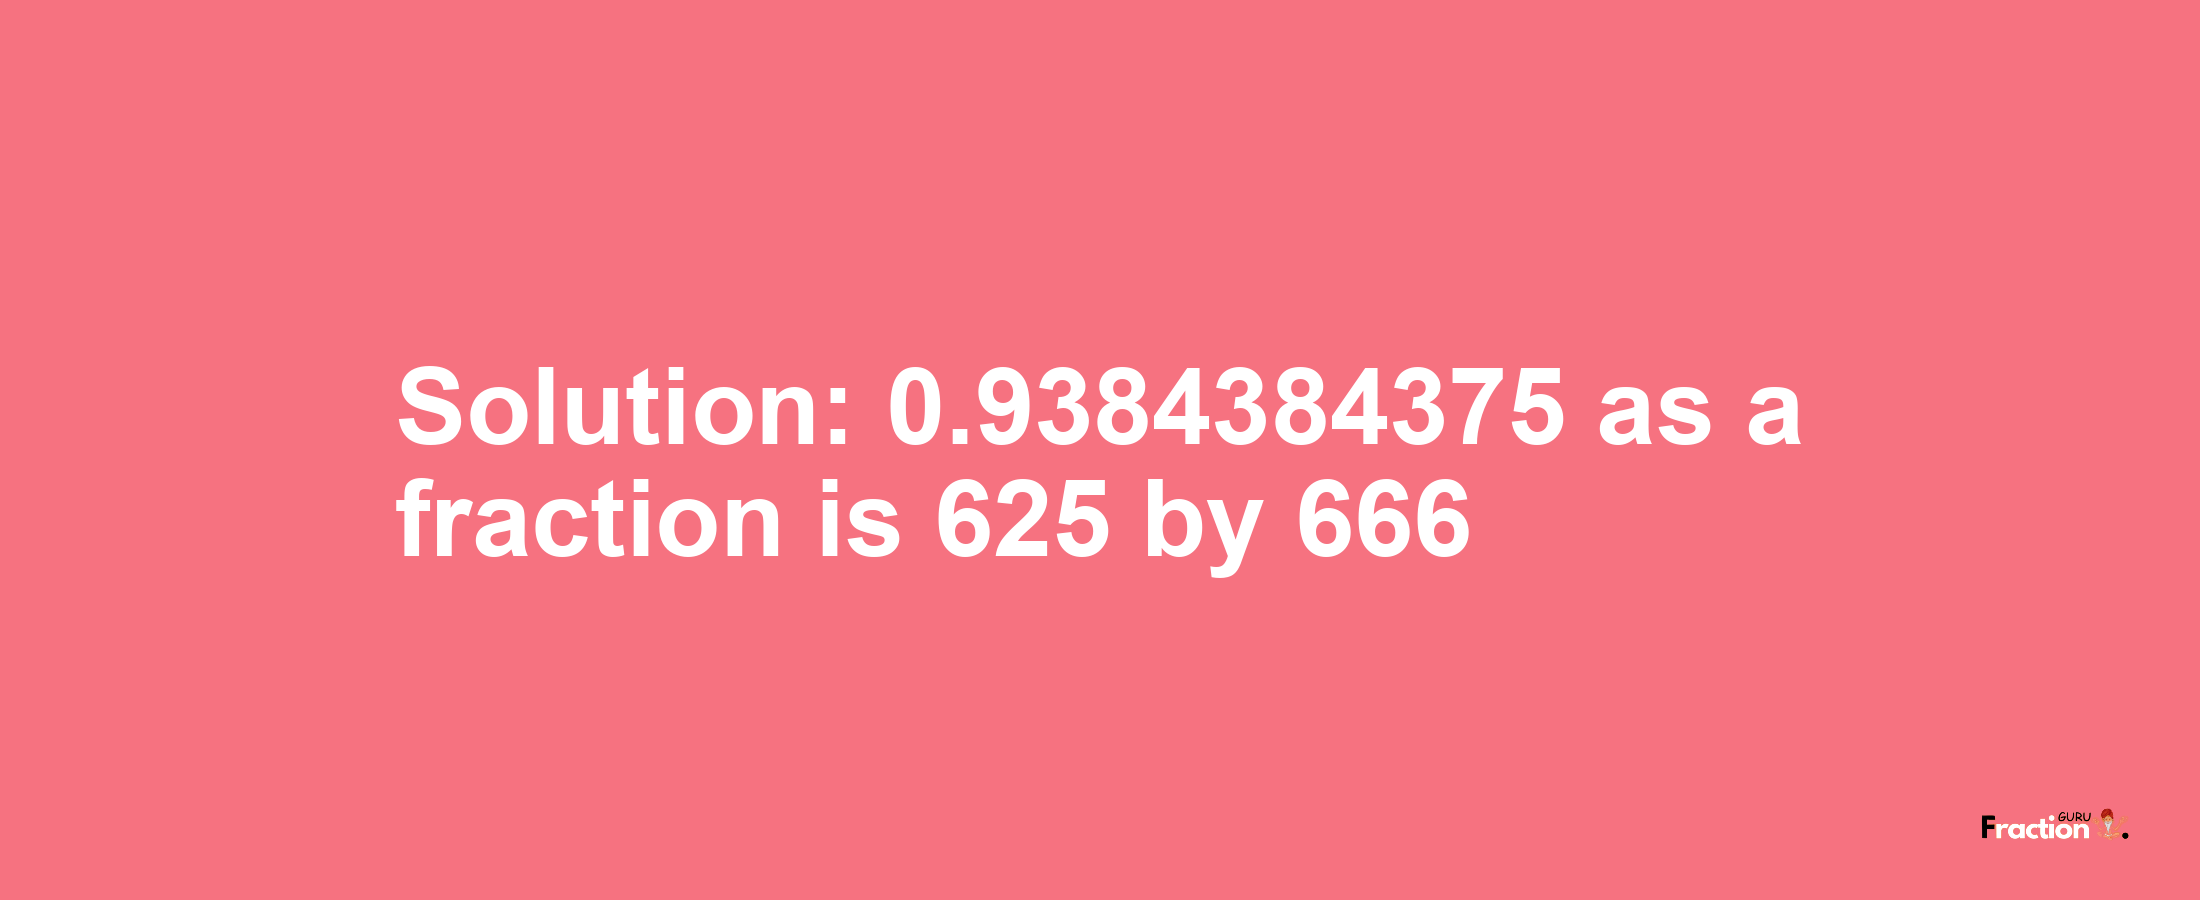 Solution:0.9384384375 as a fraction is 625/666